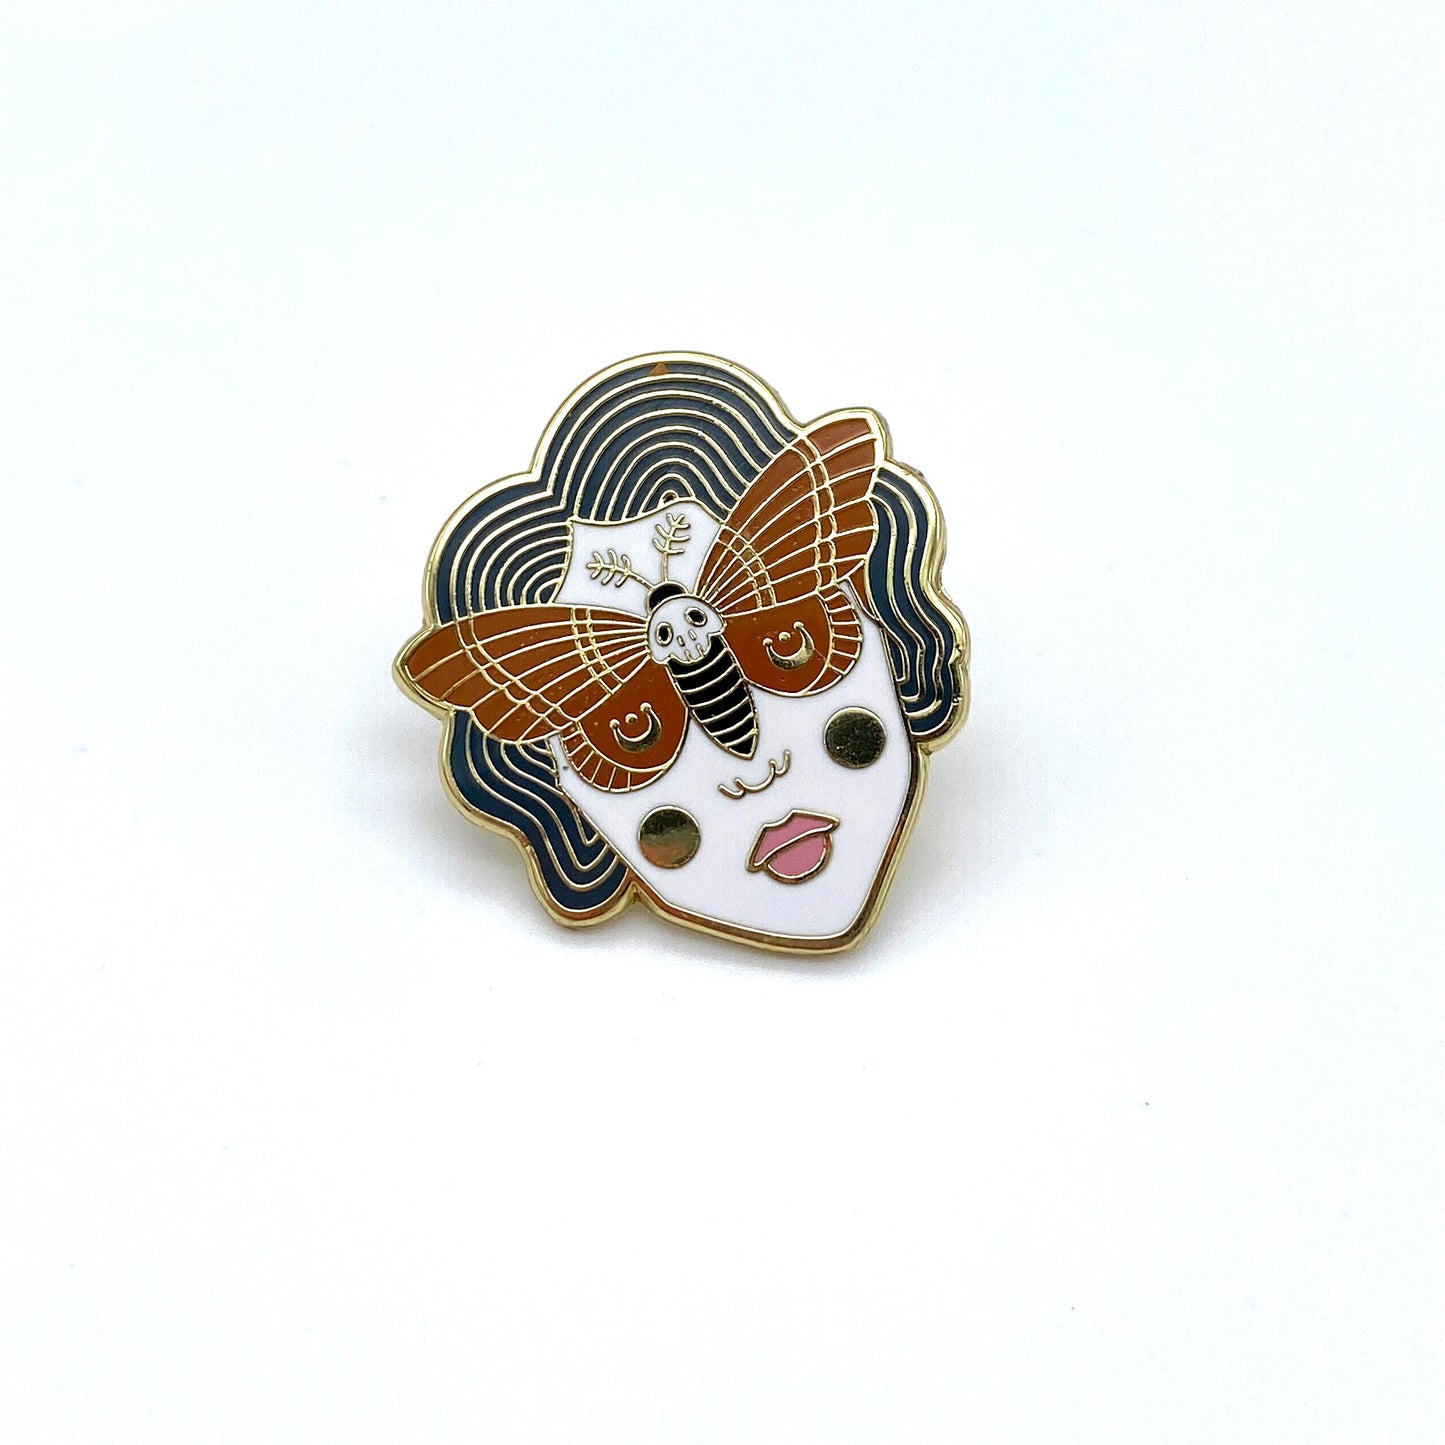 Blinded by Beauty – Moth Pin Series